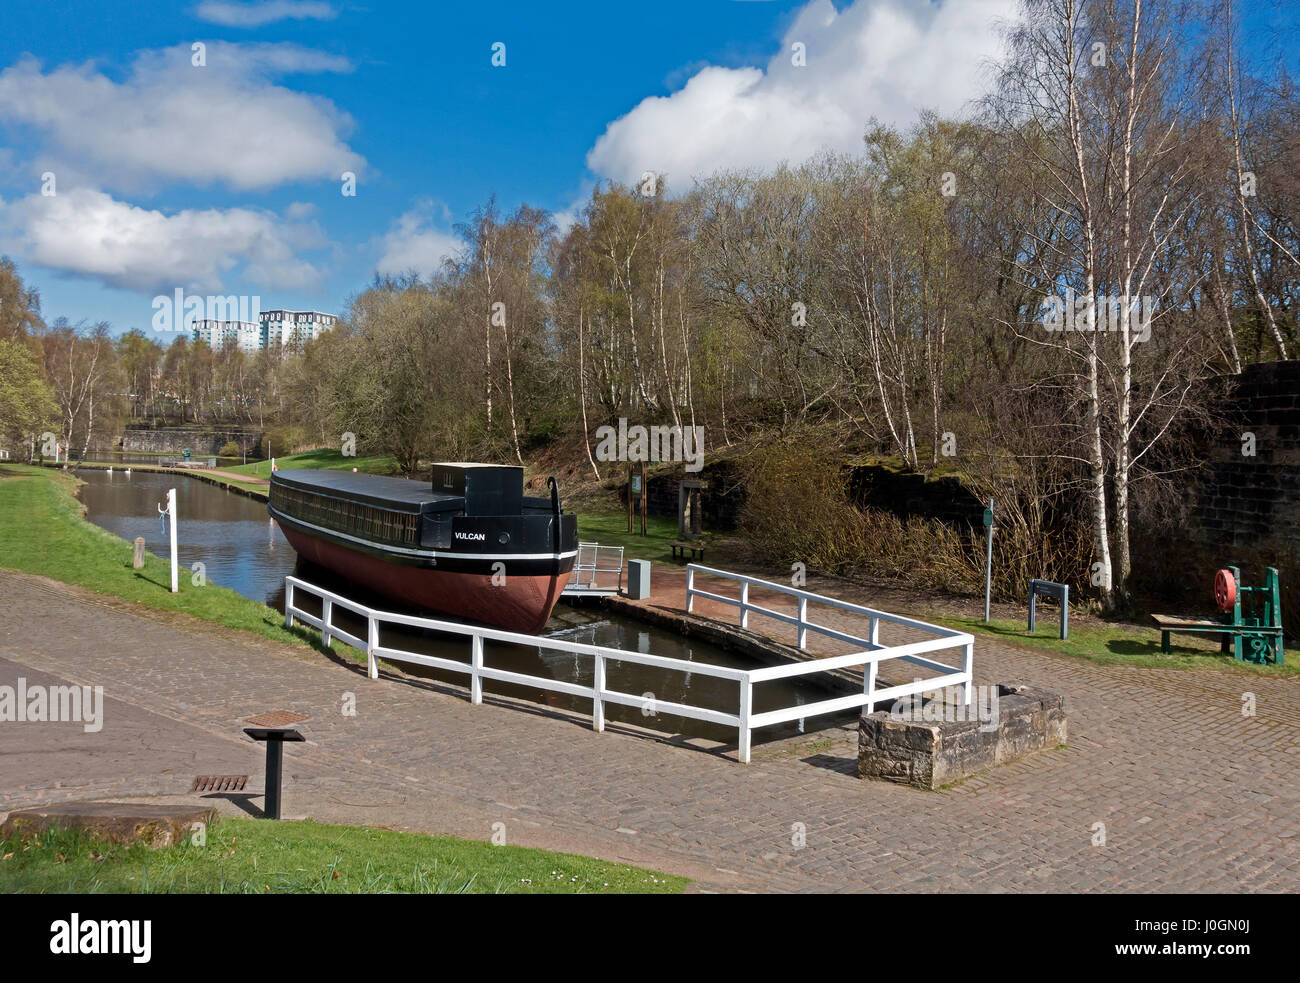 The Vulcan canal barge in the Monkland Canal at Summerlee Museum of Scottish Industrial Life Coatbridge North Lanarkshire Scotland UK Stock Photo